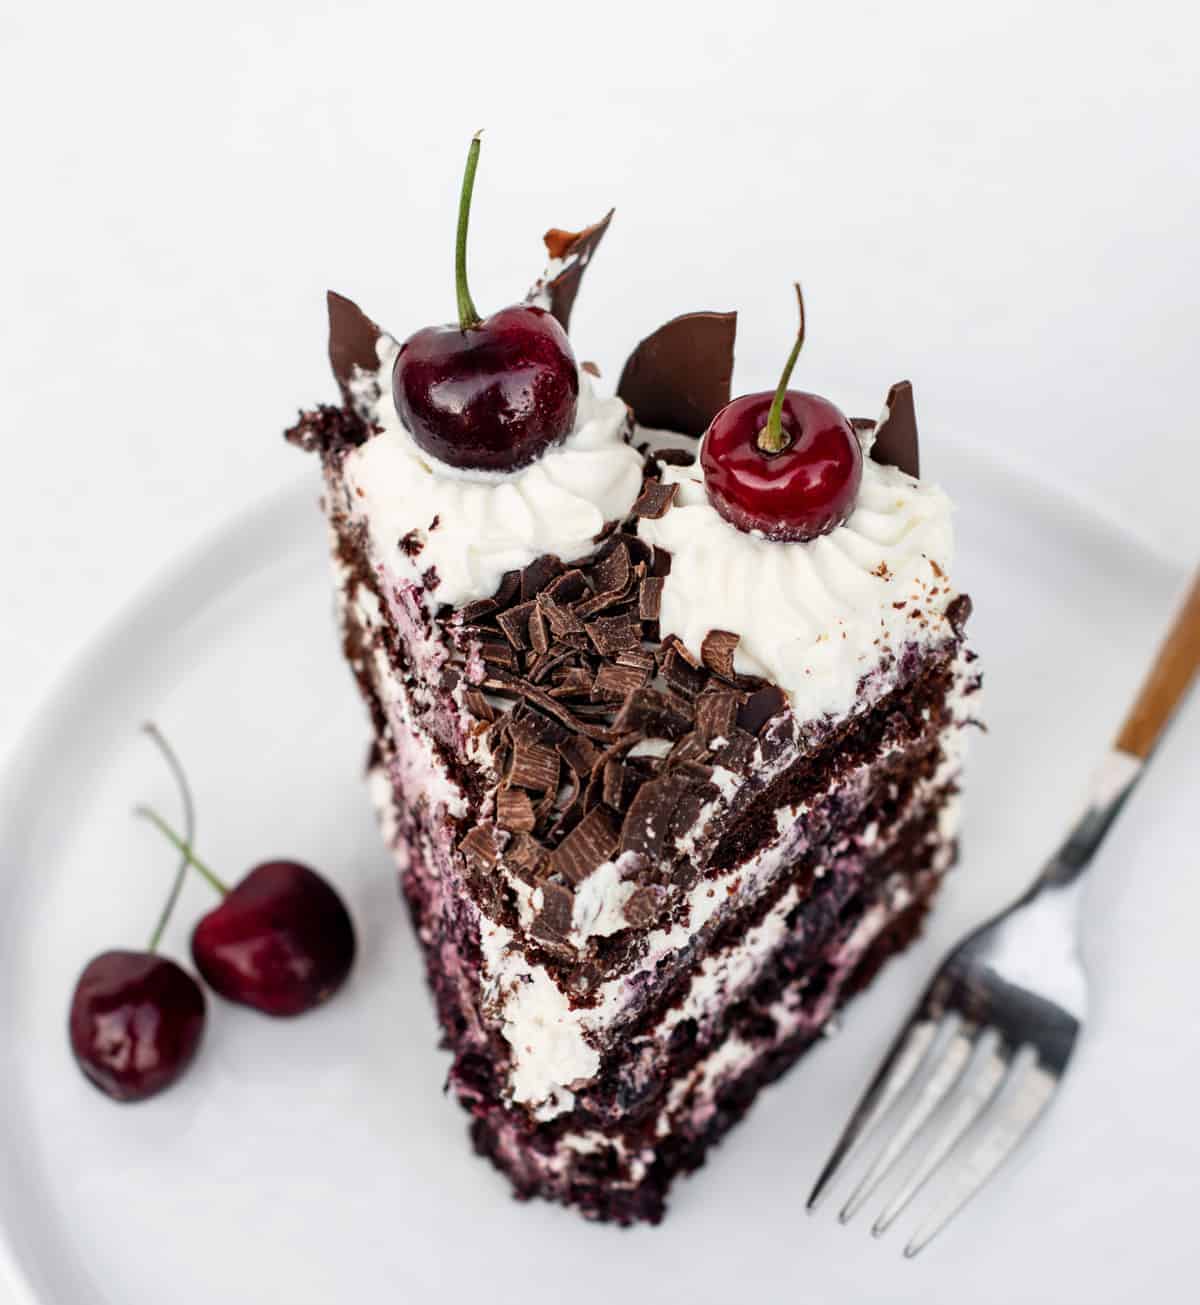 A slice of black forest cake on a white plate